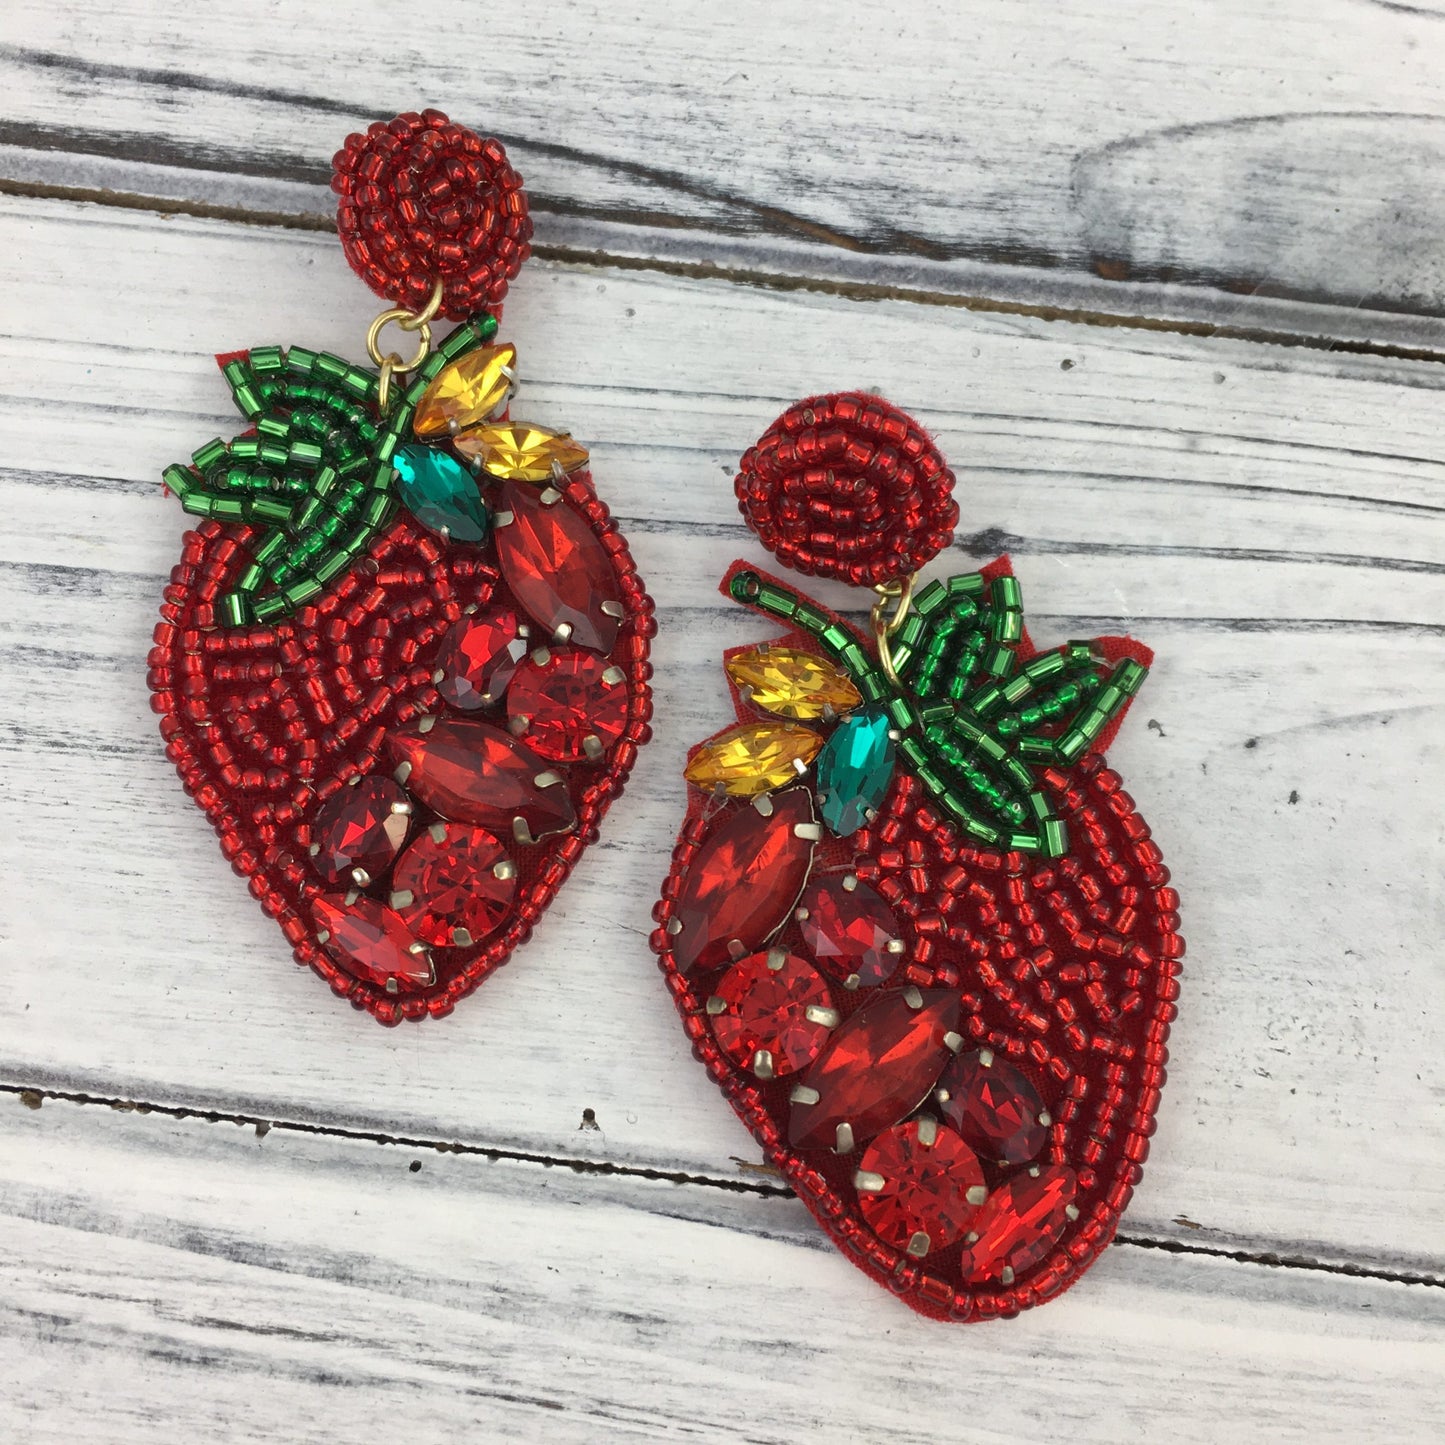 Beaded and Jeweled Strawberry Earrings